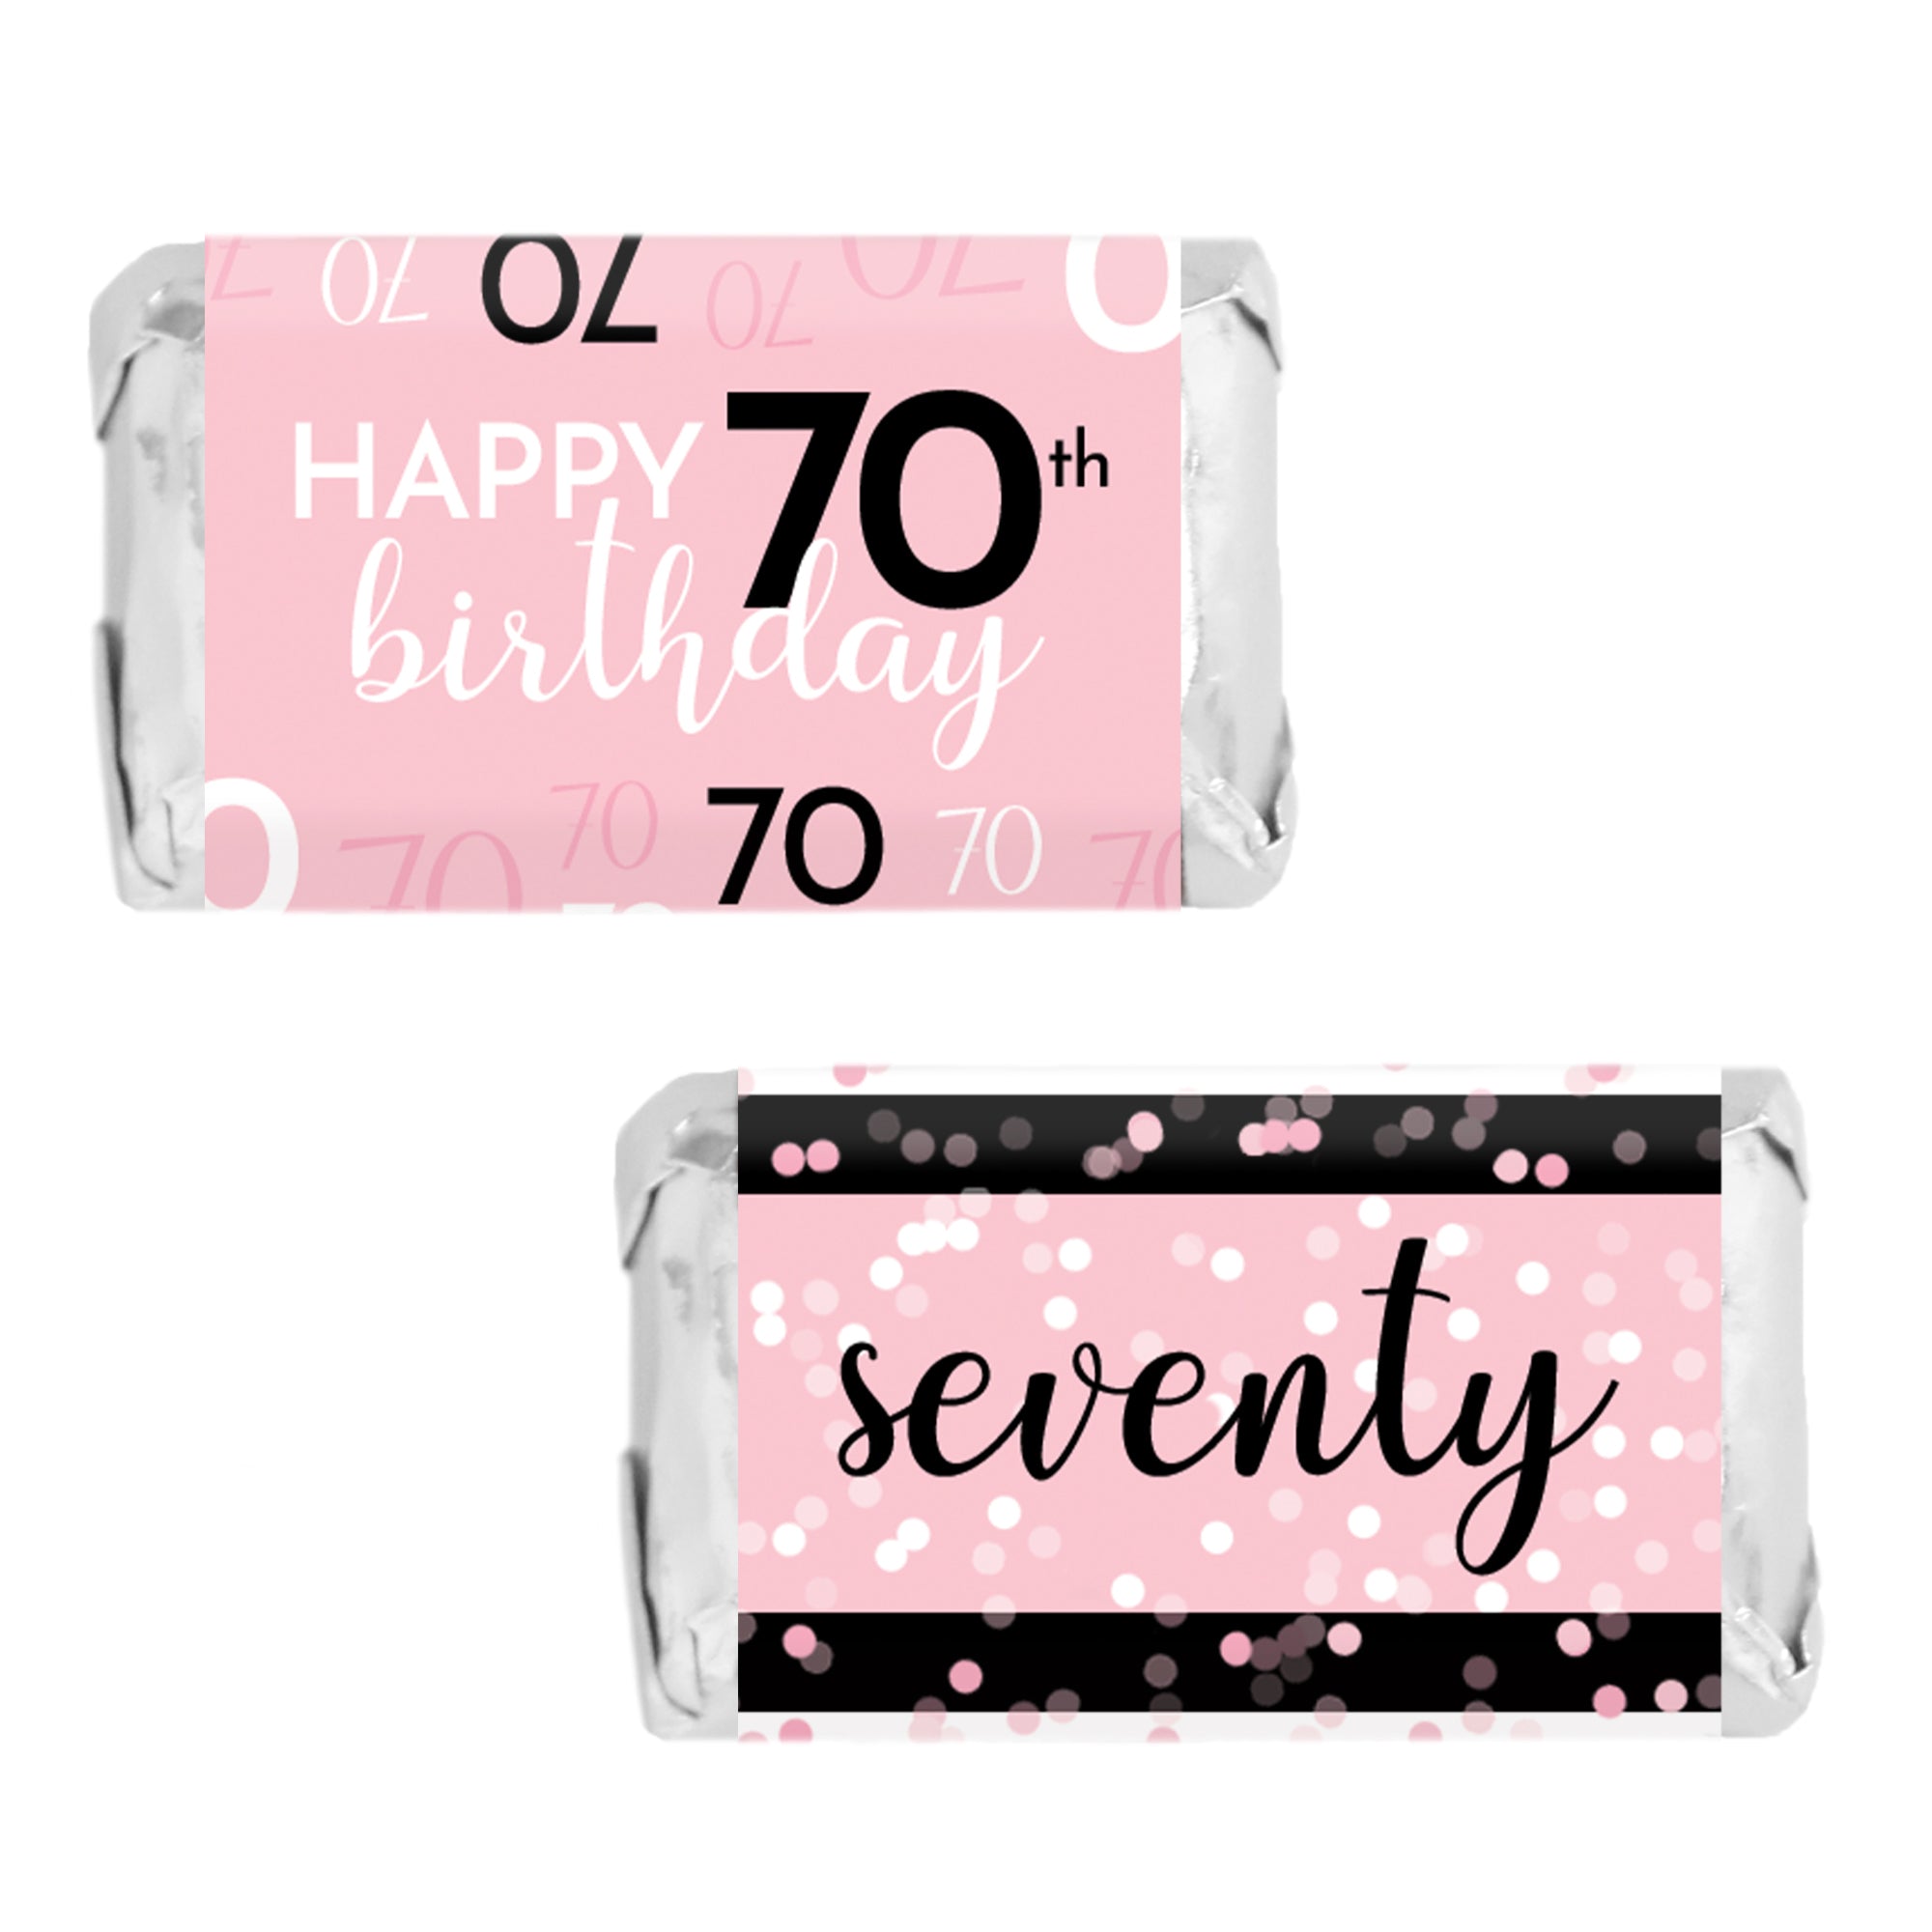 Black and Pink Happy Birthday Gift Bag